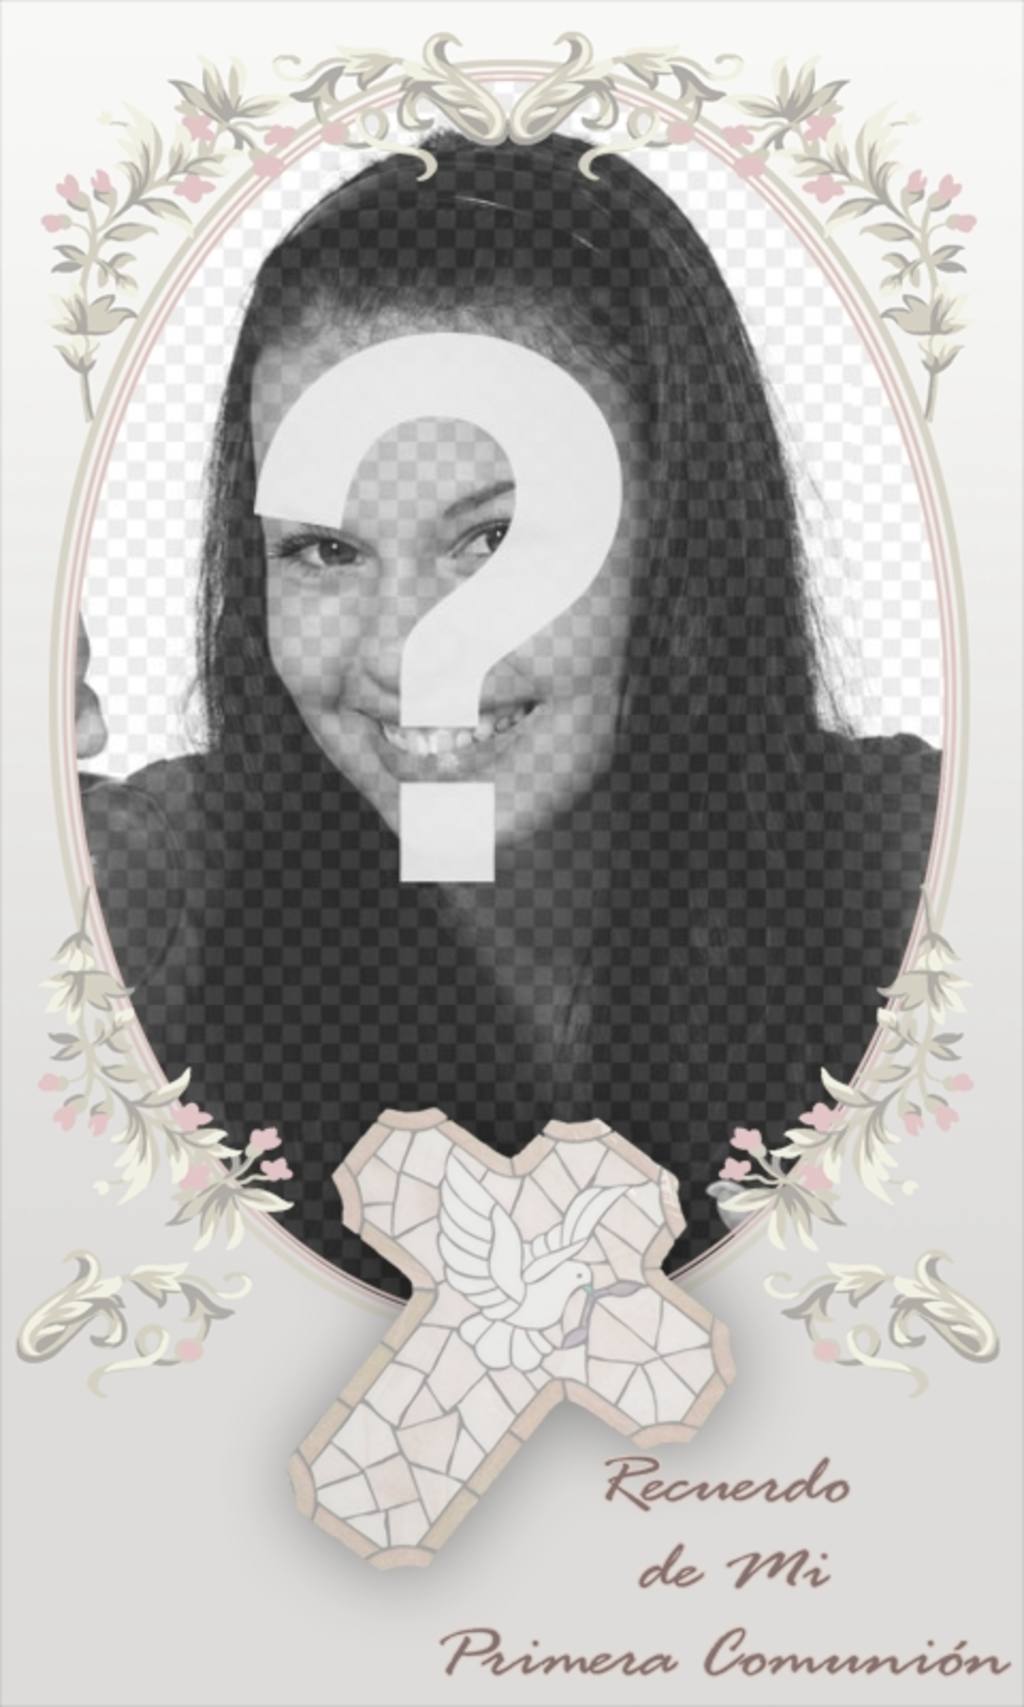 Template Communion memory card with a photograph. Framing a picture in this oval frame of pink shades with floral..